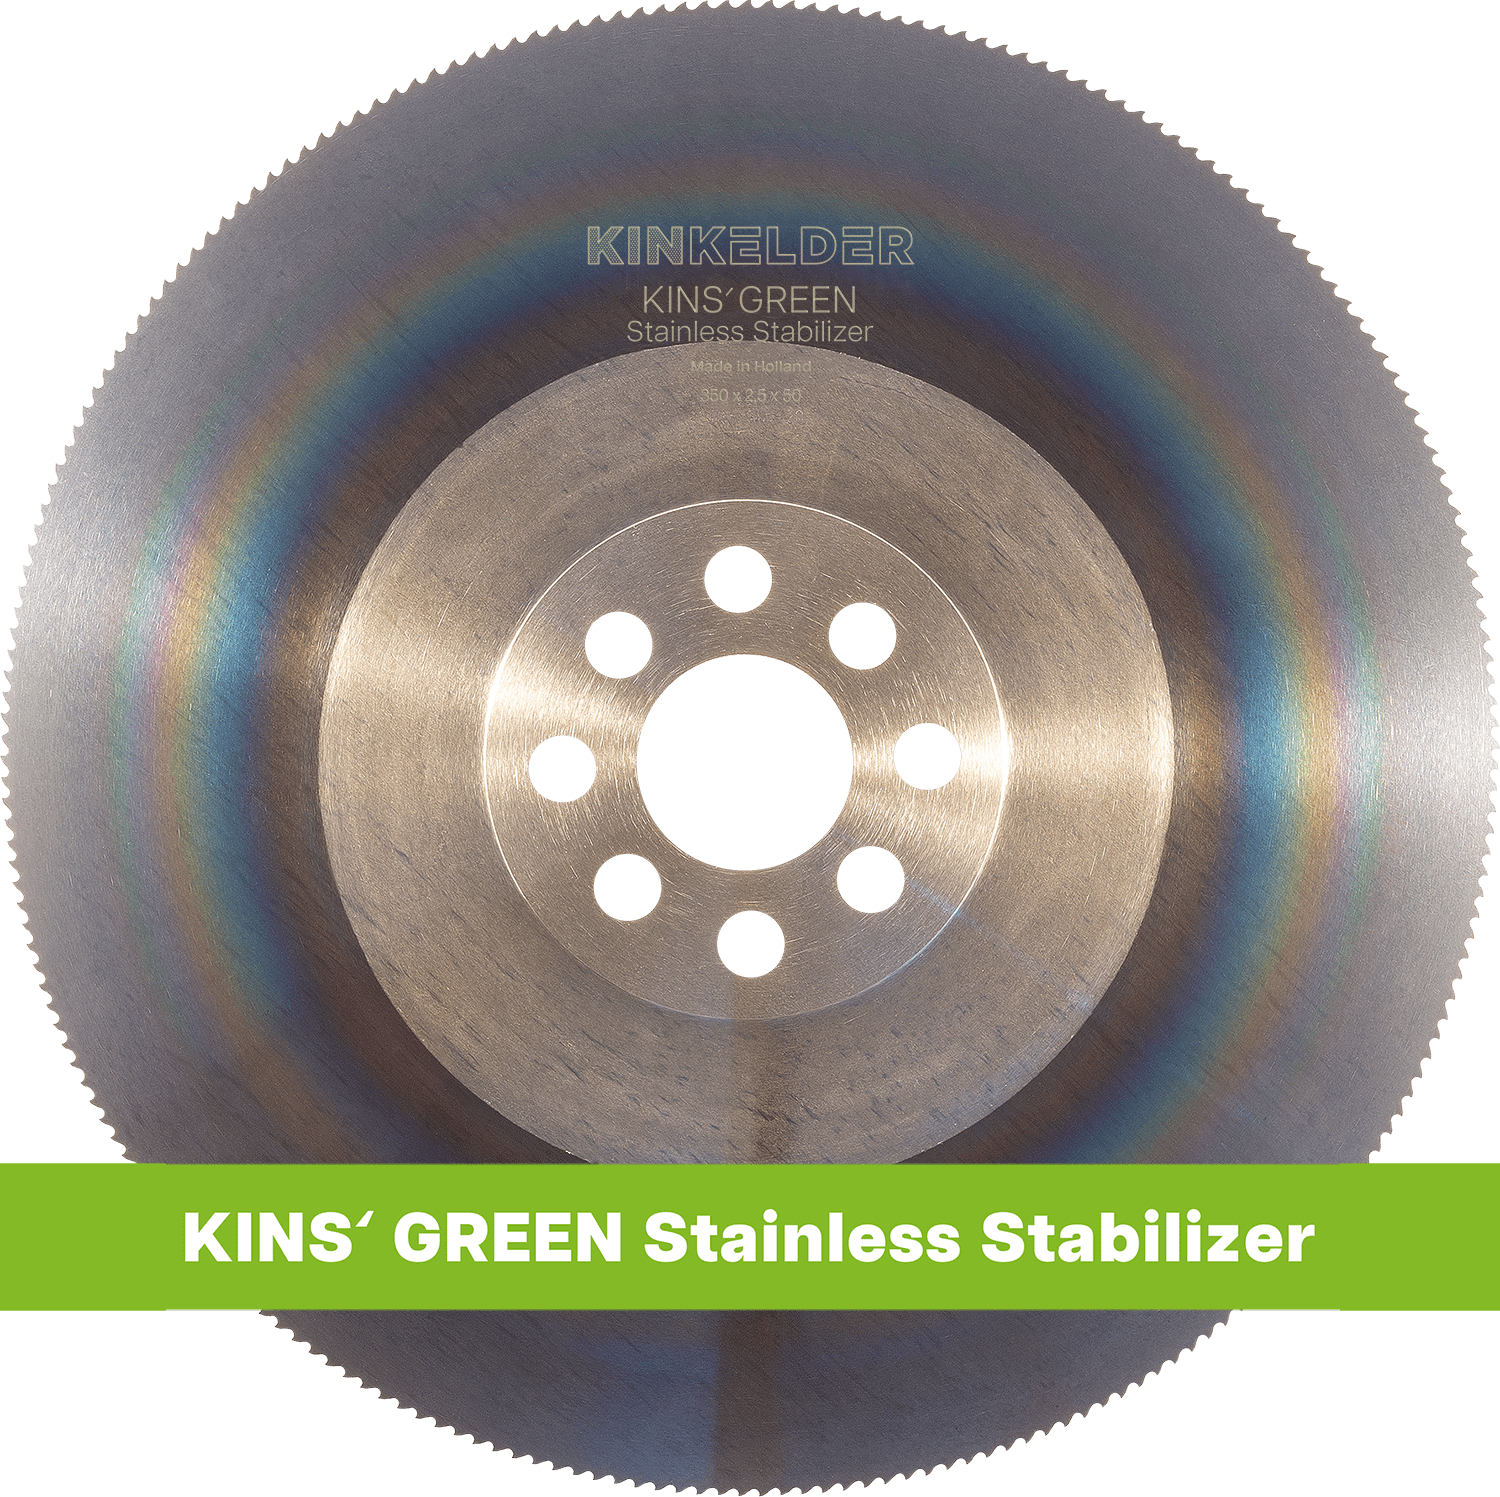 KINS' GREEN Stainless Stabilizer